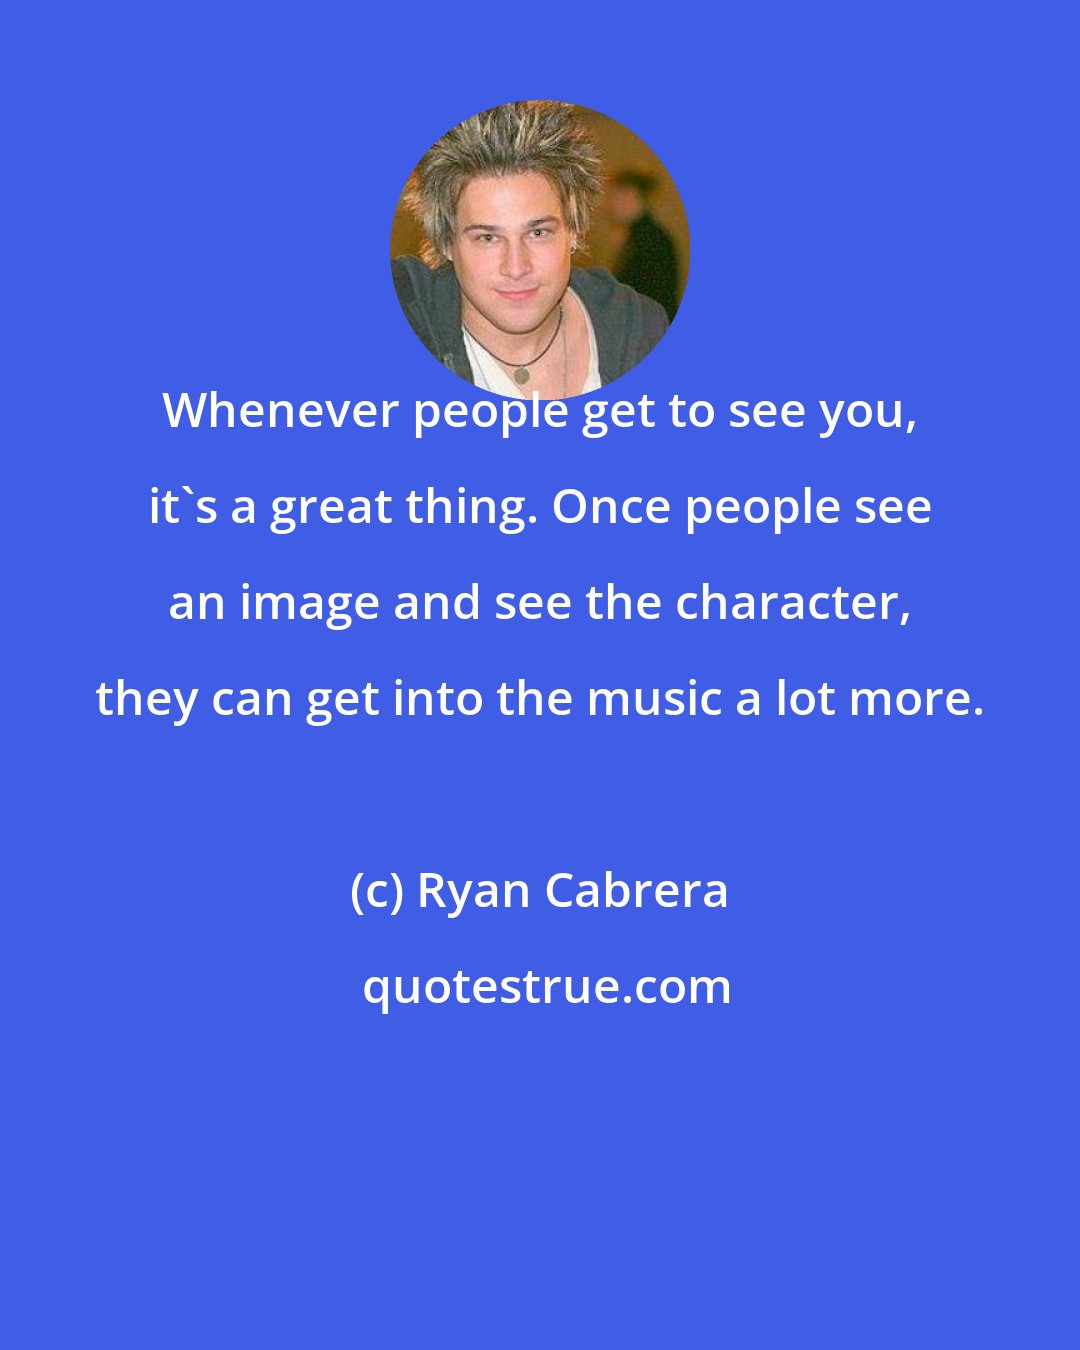 Ryan Cabrera: Whenever people get to see you, it's a great thing. Once people see an image and see the character, they can get into the music a lot more.